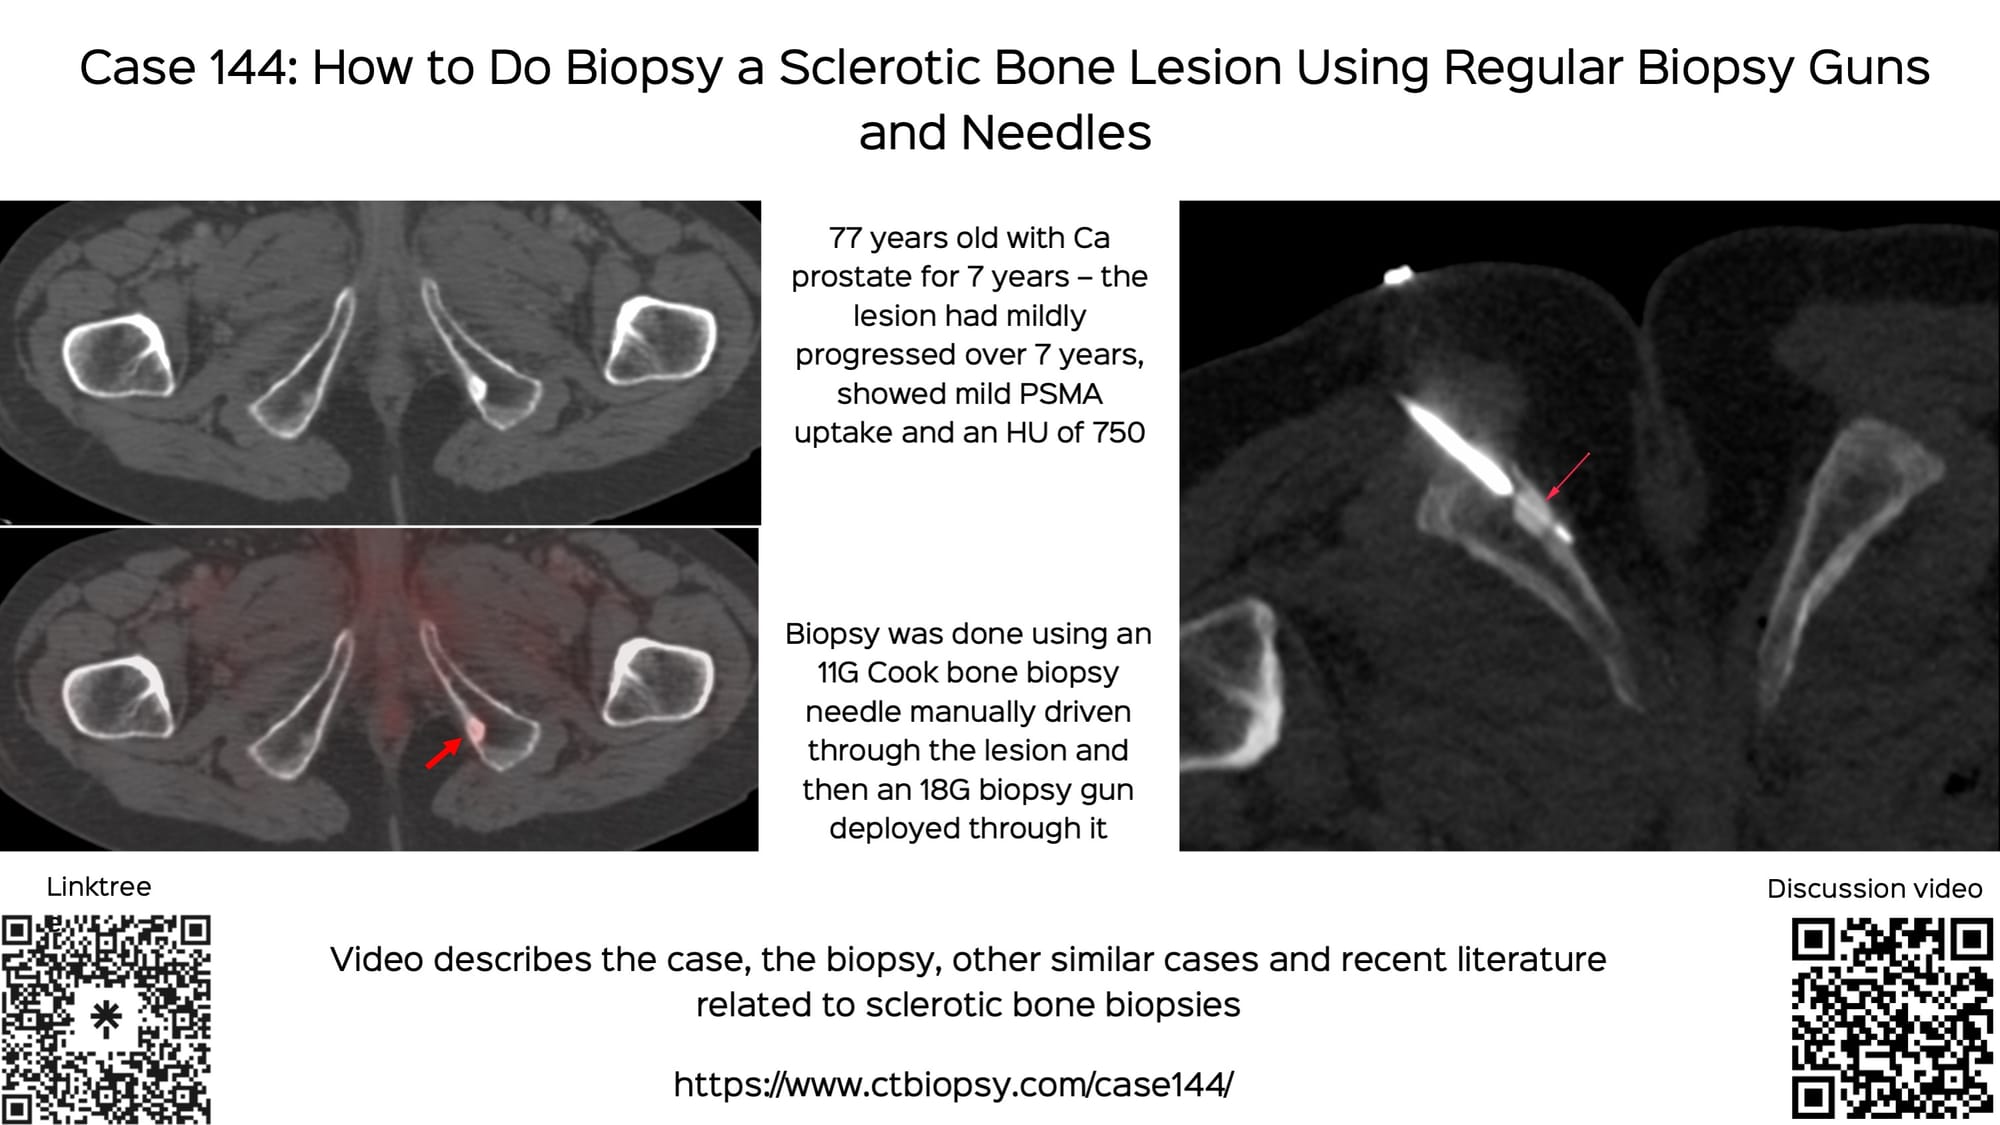 Case 144: How to Biopsy a Sclerotic Bone Lesion Using Regular Biopsy Guns and Needles